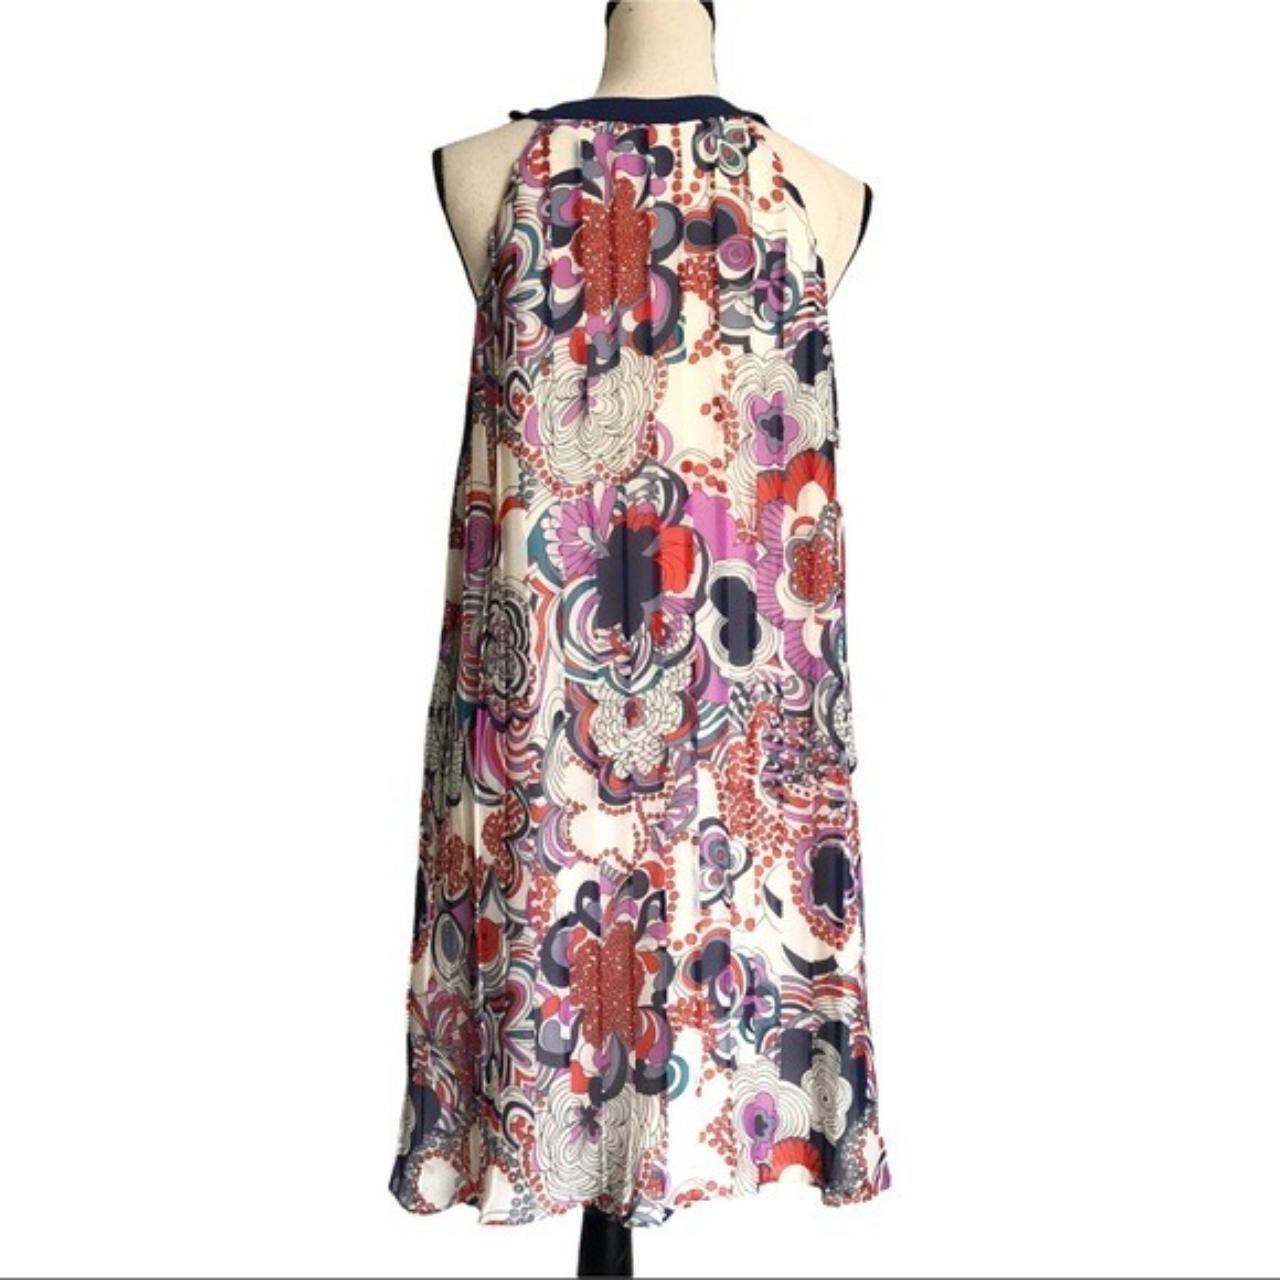 Product Image 2 - Liberty Of London Pleated Floral